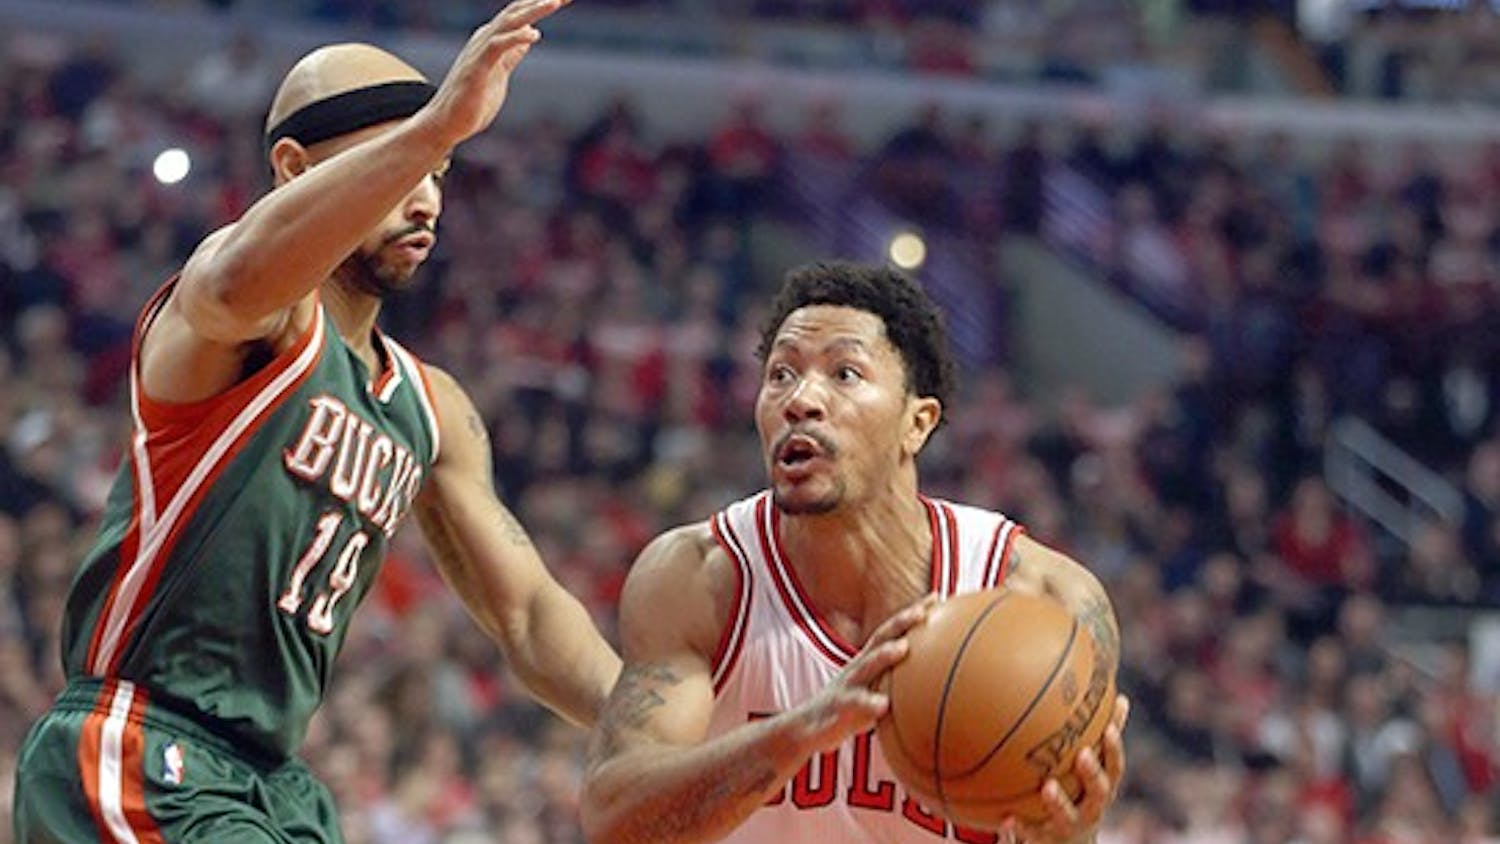 Chicago Bulls guard Derrick Rose (1) drives on Milwaukee Bucks guard Jerryd Bayless (19) during the first half on Monday, April 20, 2015, at the United Center in Chicago. (Brian Cassella/Chicago Tribune/TNS)